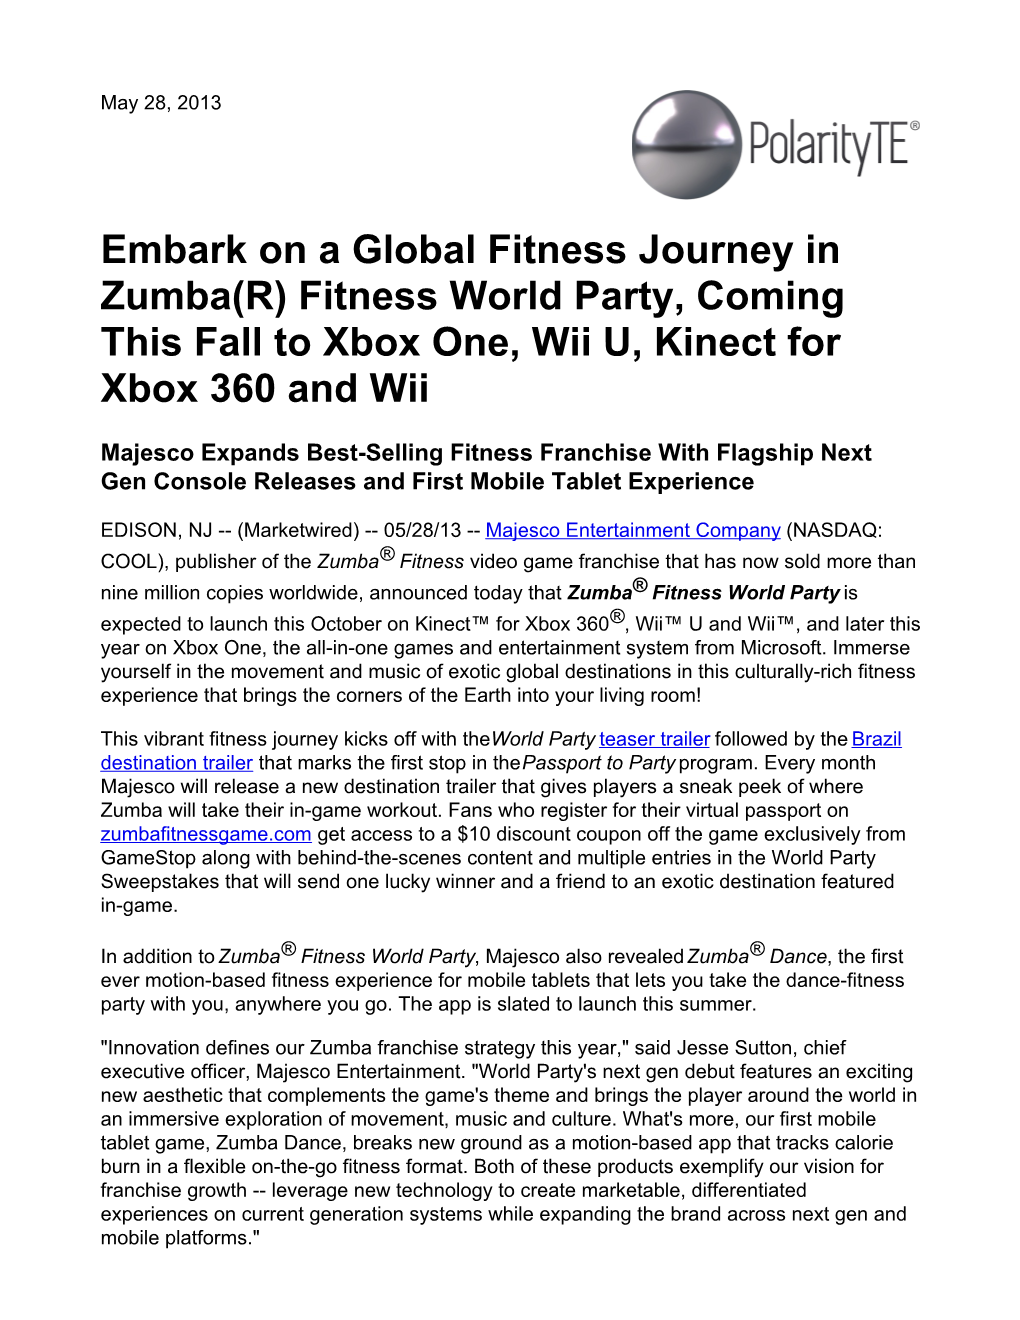 Embark on a Global Fitness Journey in Zumba(R) Fitness World Party, Coming This Fall to Xbox One, Wii U, Kinect for Xbox 360 and Wii